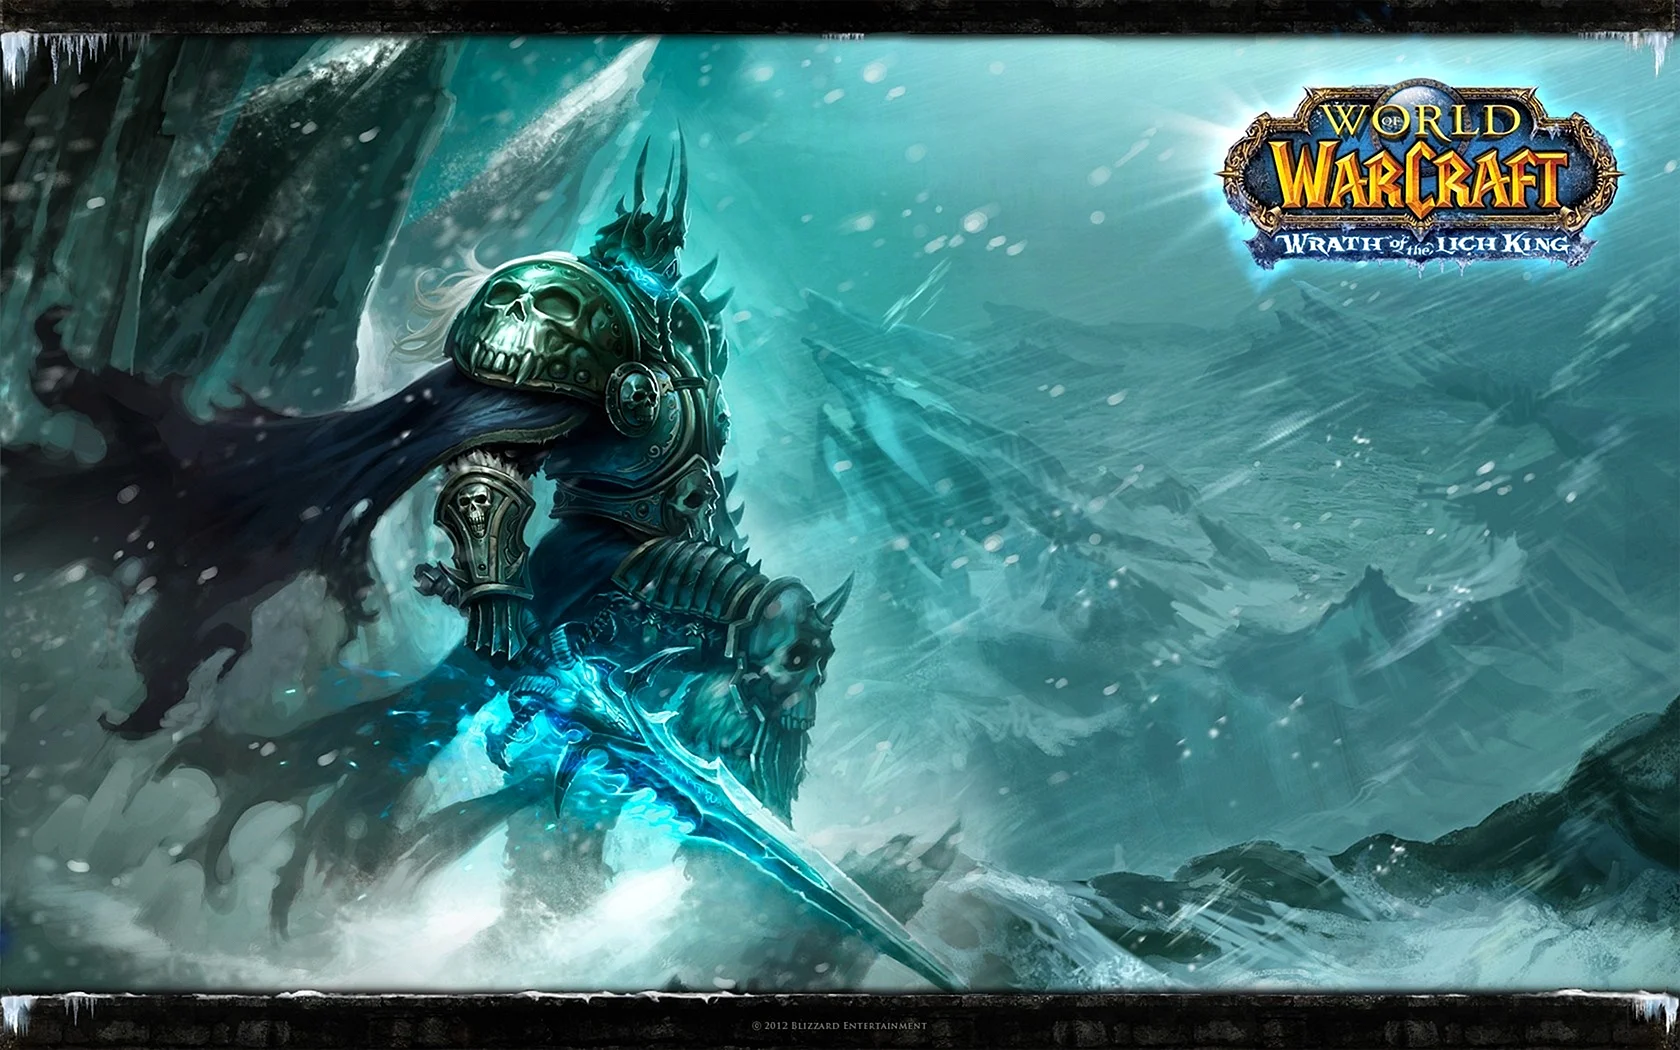 World Of Warcraft Wrath Of The Lich King Wallpaper